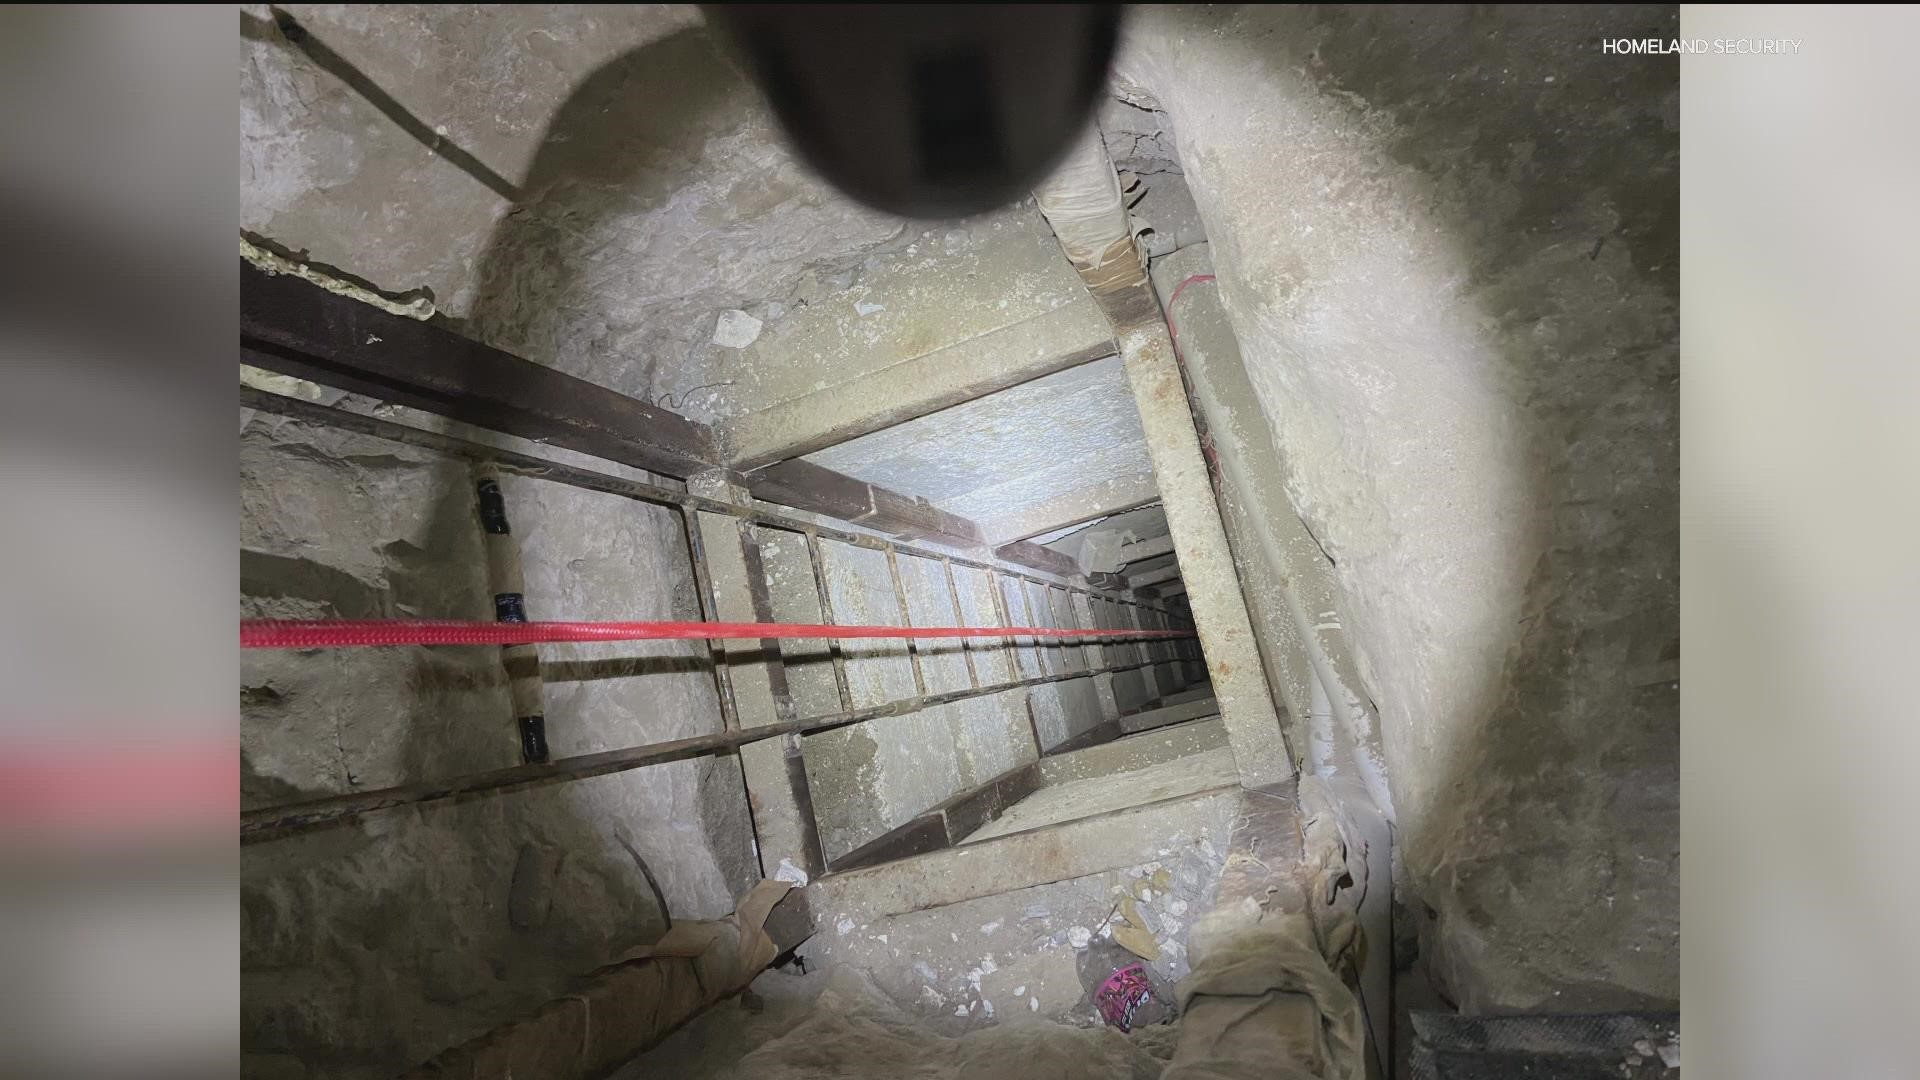 It's the first subterranean tunnel discovery in the region since 2020